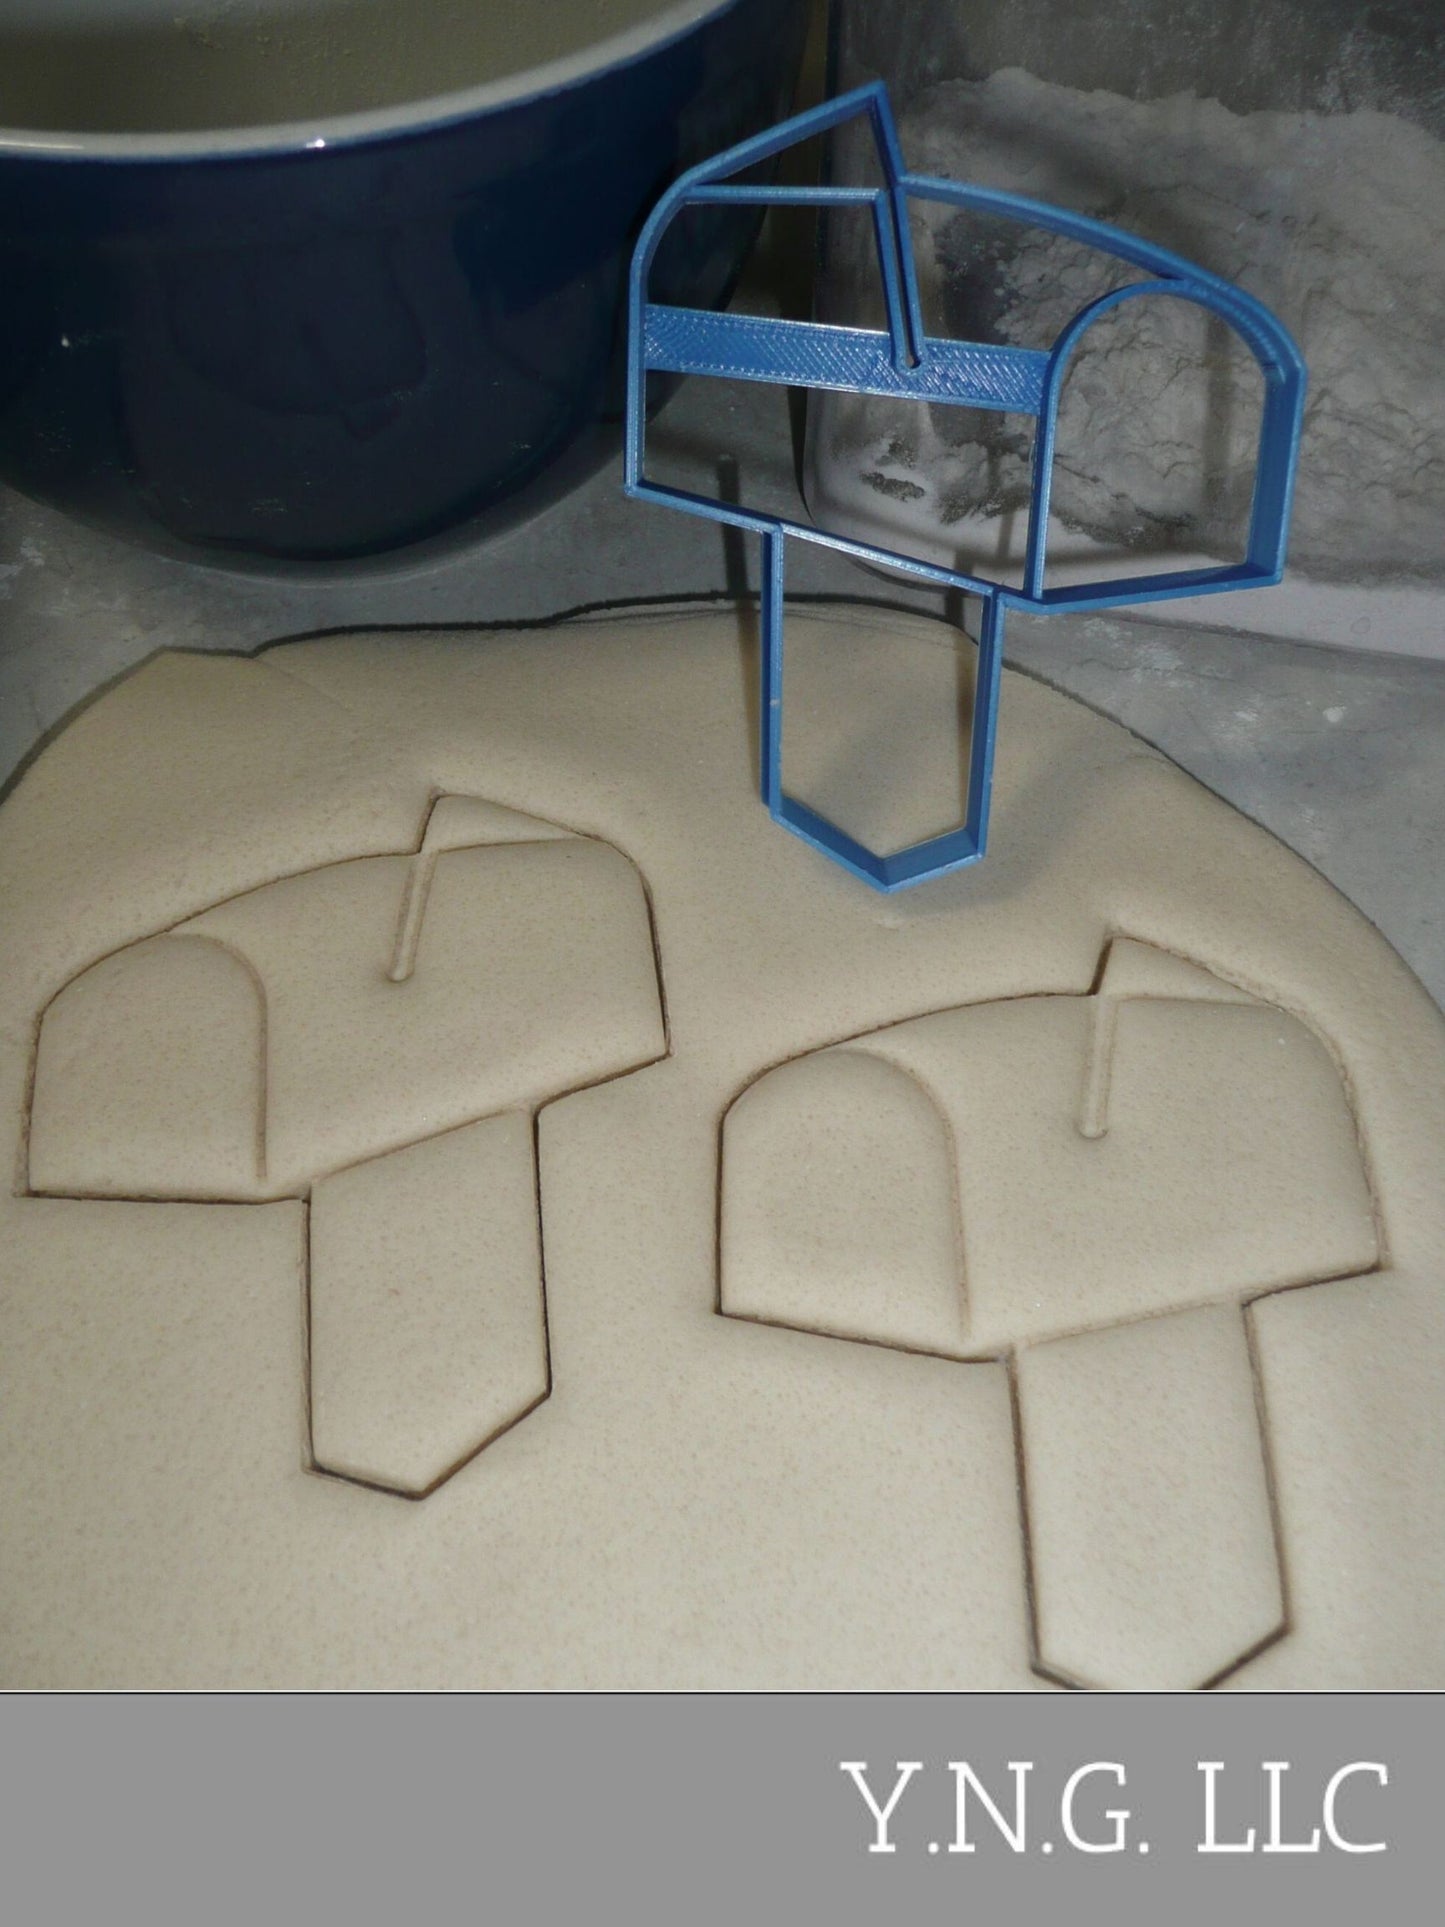 Mailbox Residential House Home Mail Post Box Cookie Cutter USA PR3397